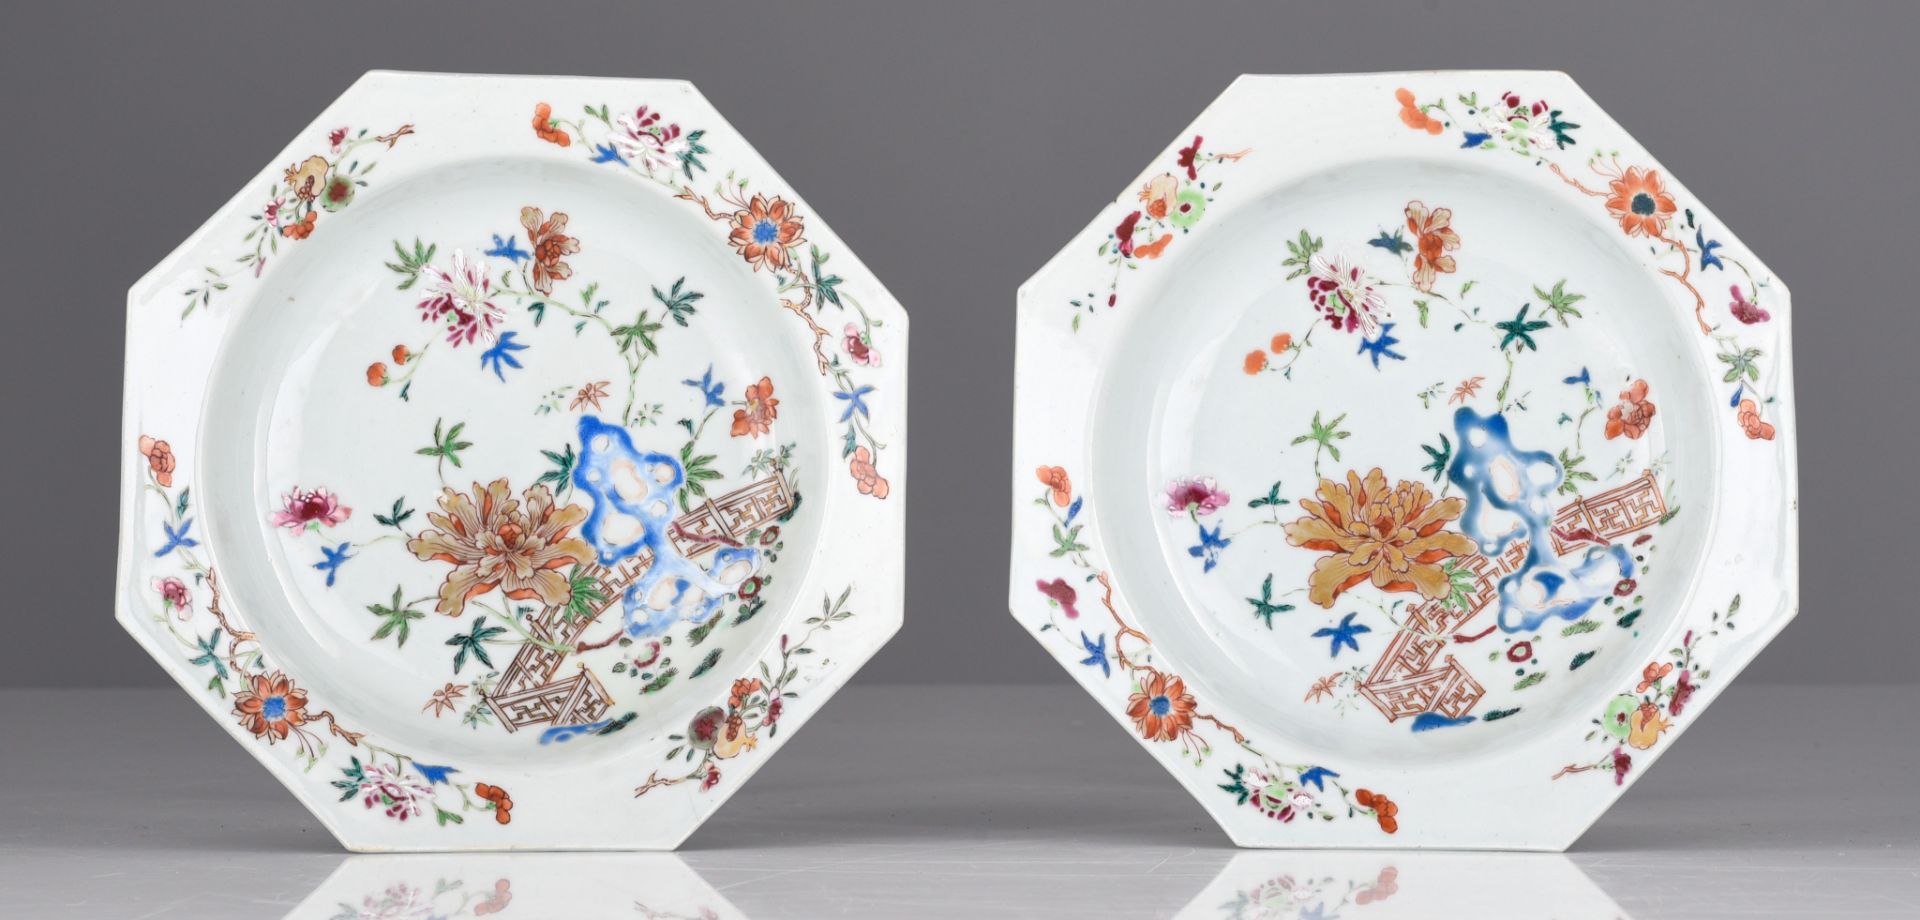 A collection of six Chinese famille rose export porcelain plates, 18thC, ¯ 23,5 cm - Image 9 of 10